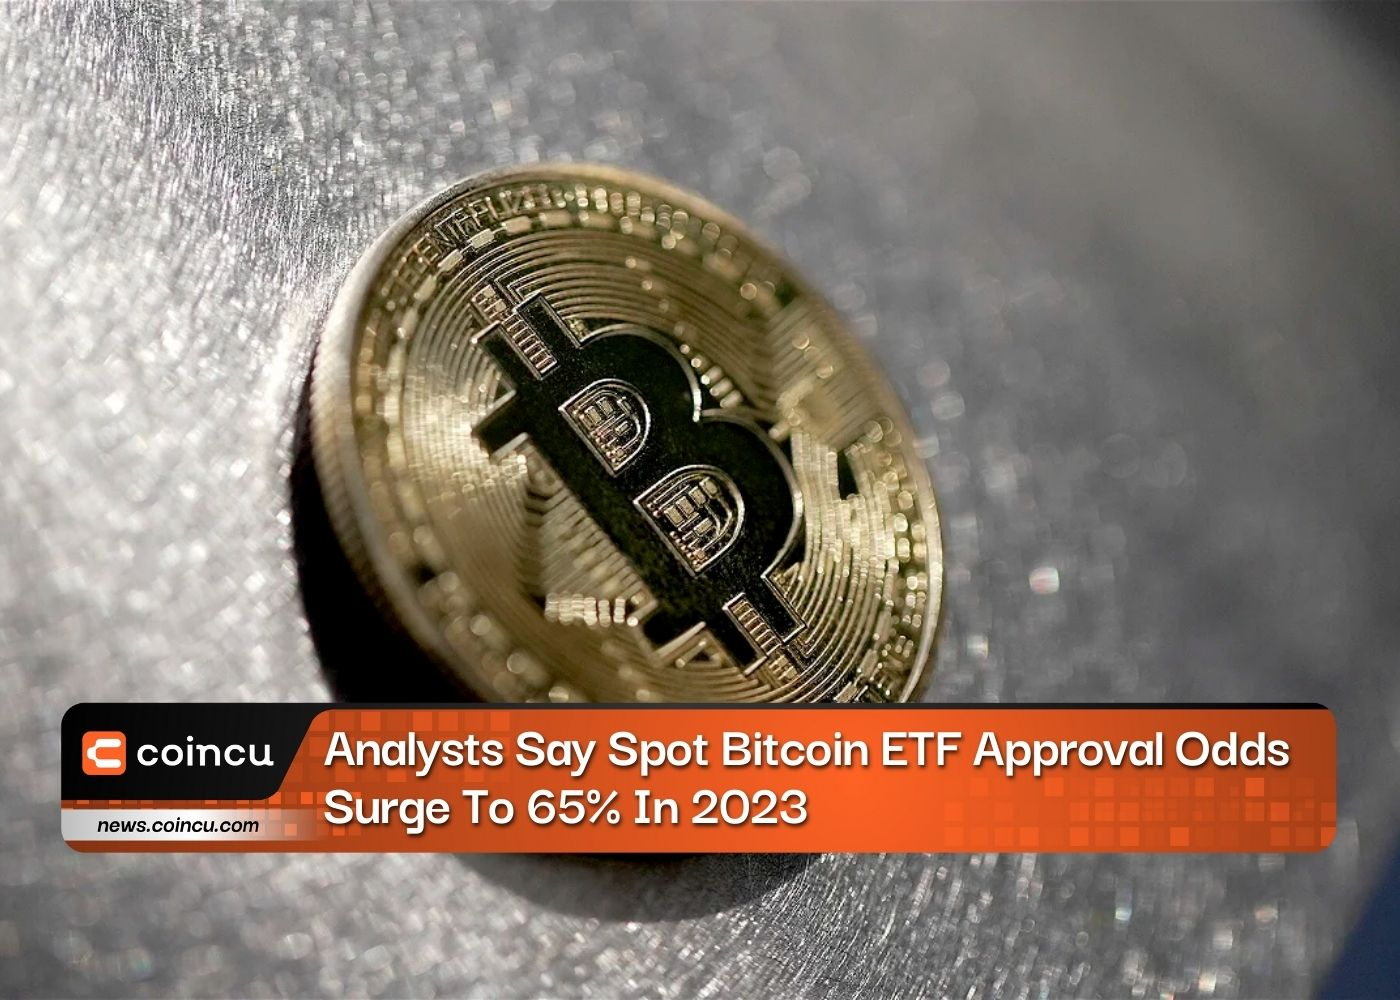 Analysts Say Spot Bitcoin ETF Approval Odds Surge To 65% In 2023